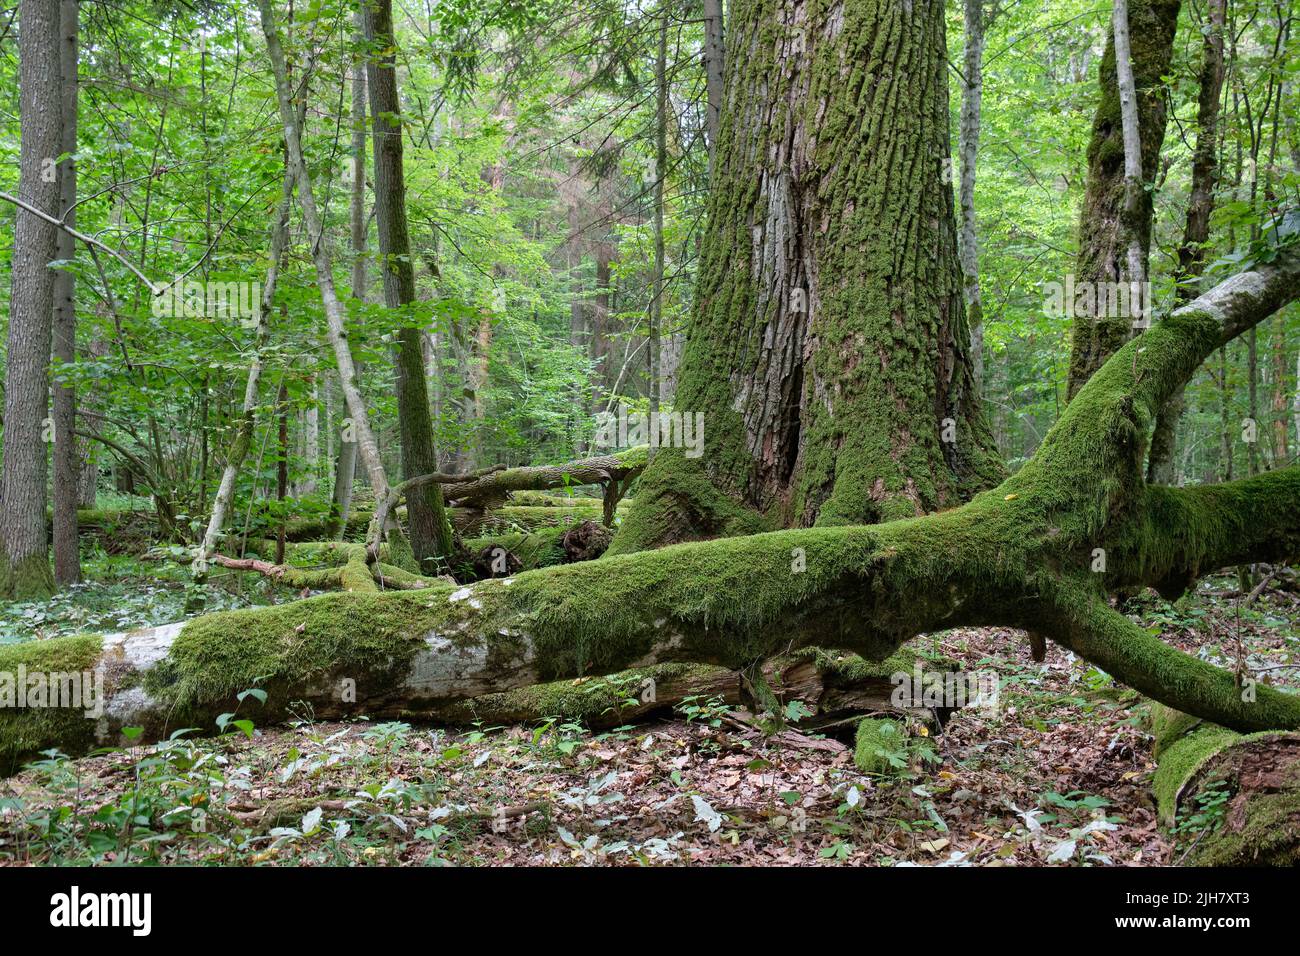 Broken old hornbeam tree and old oak tree in background in summertime deciduous tree stand, Bialowieza Forest, Poland, Europe Stock Photo